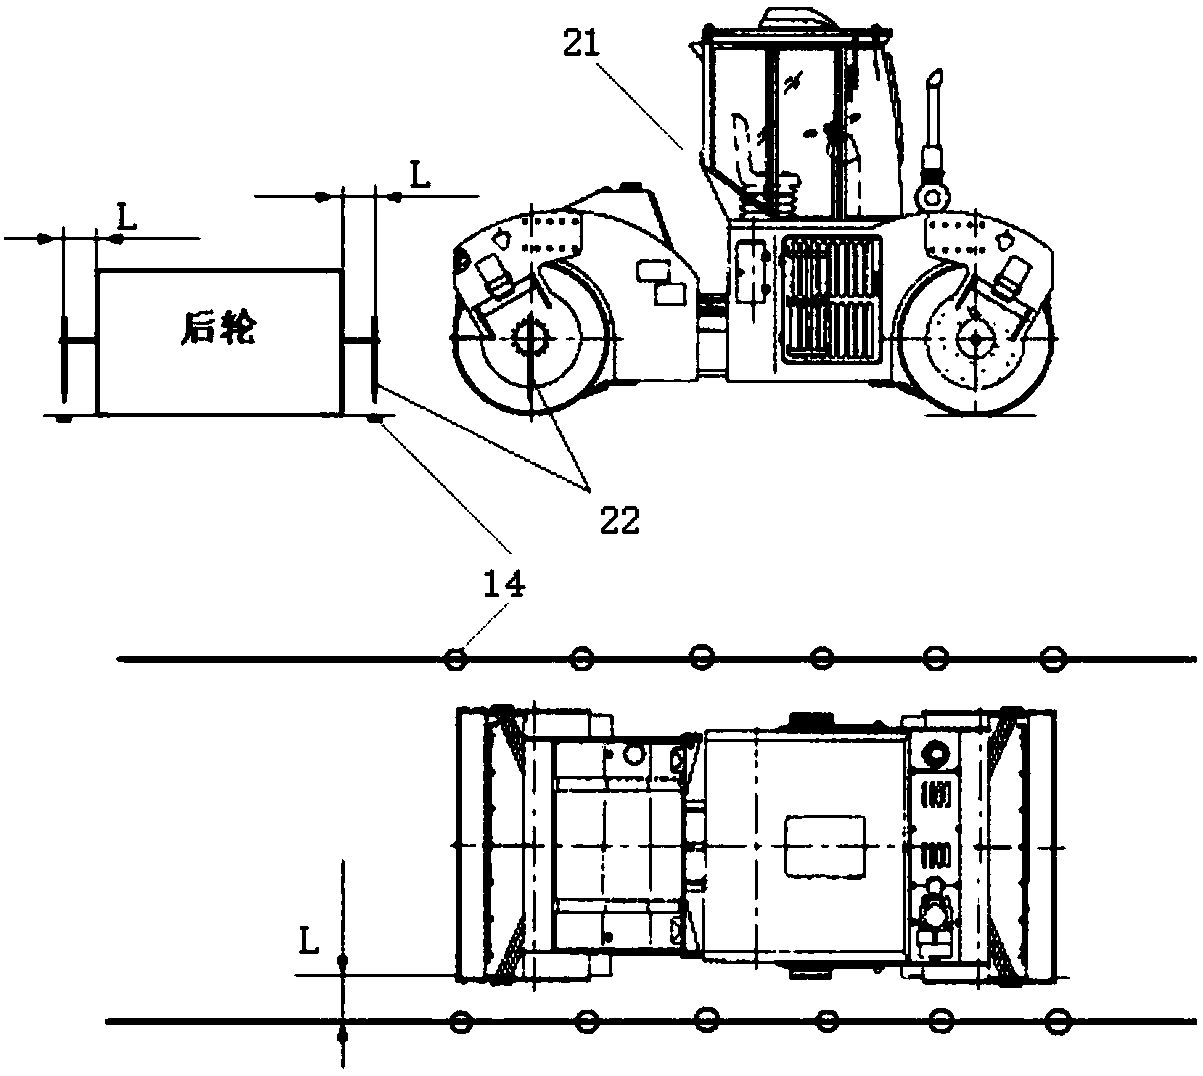 Road roller tracking practical training device and method